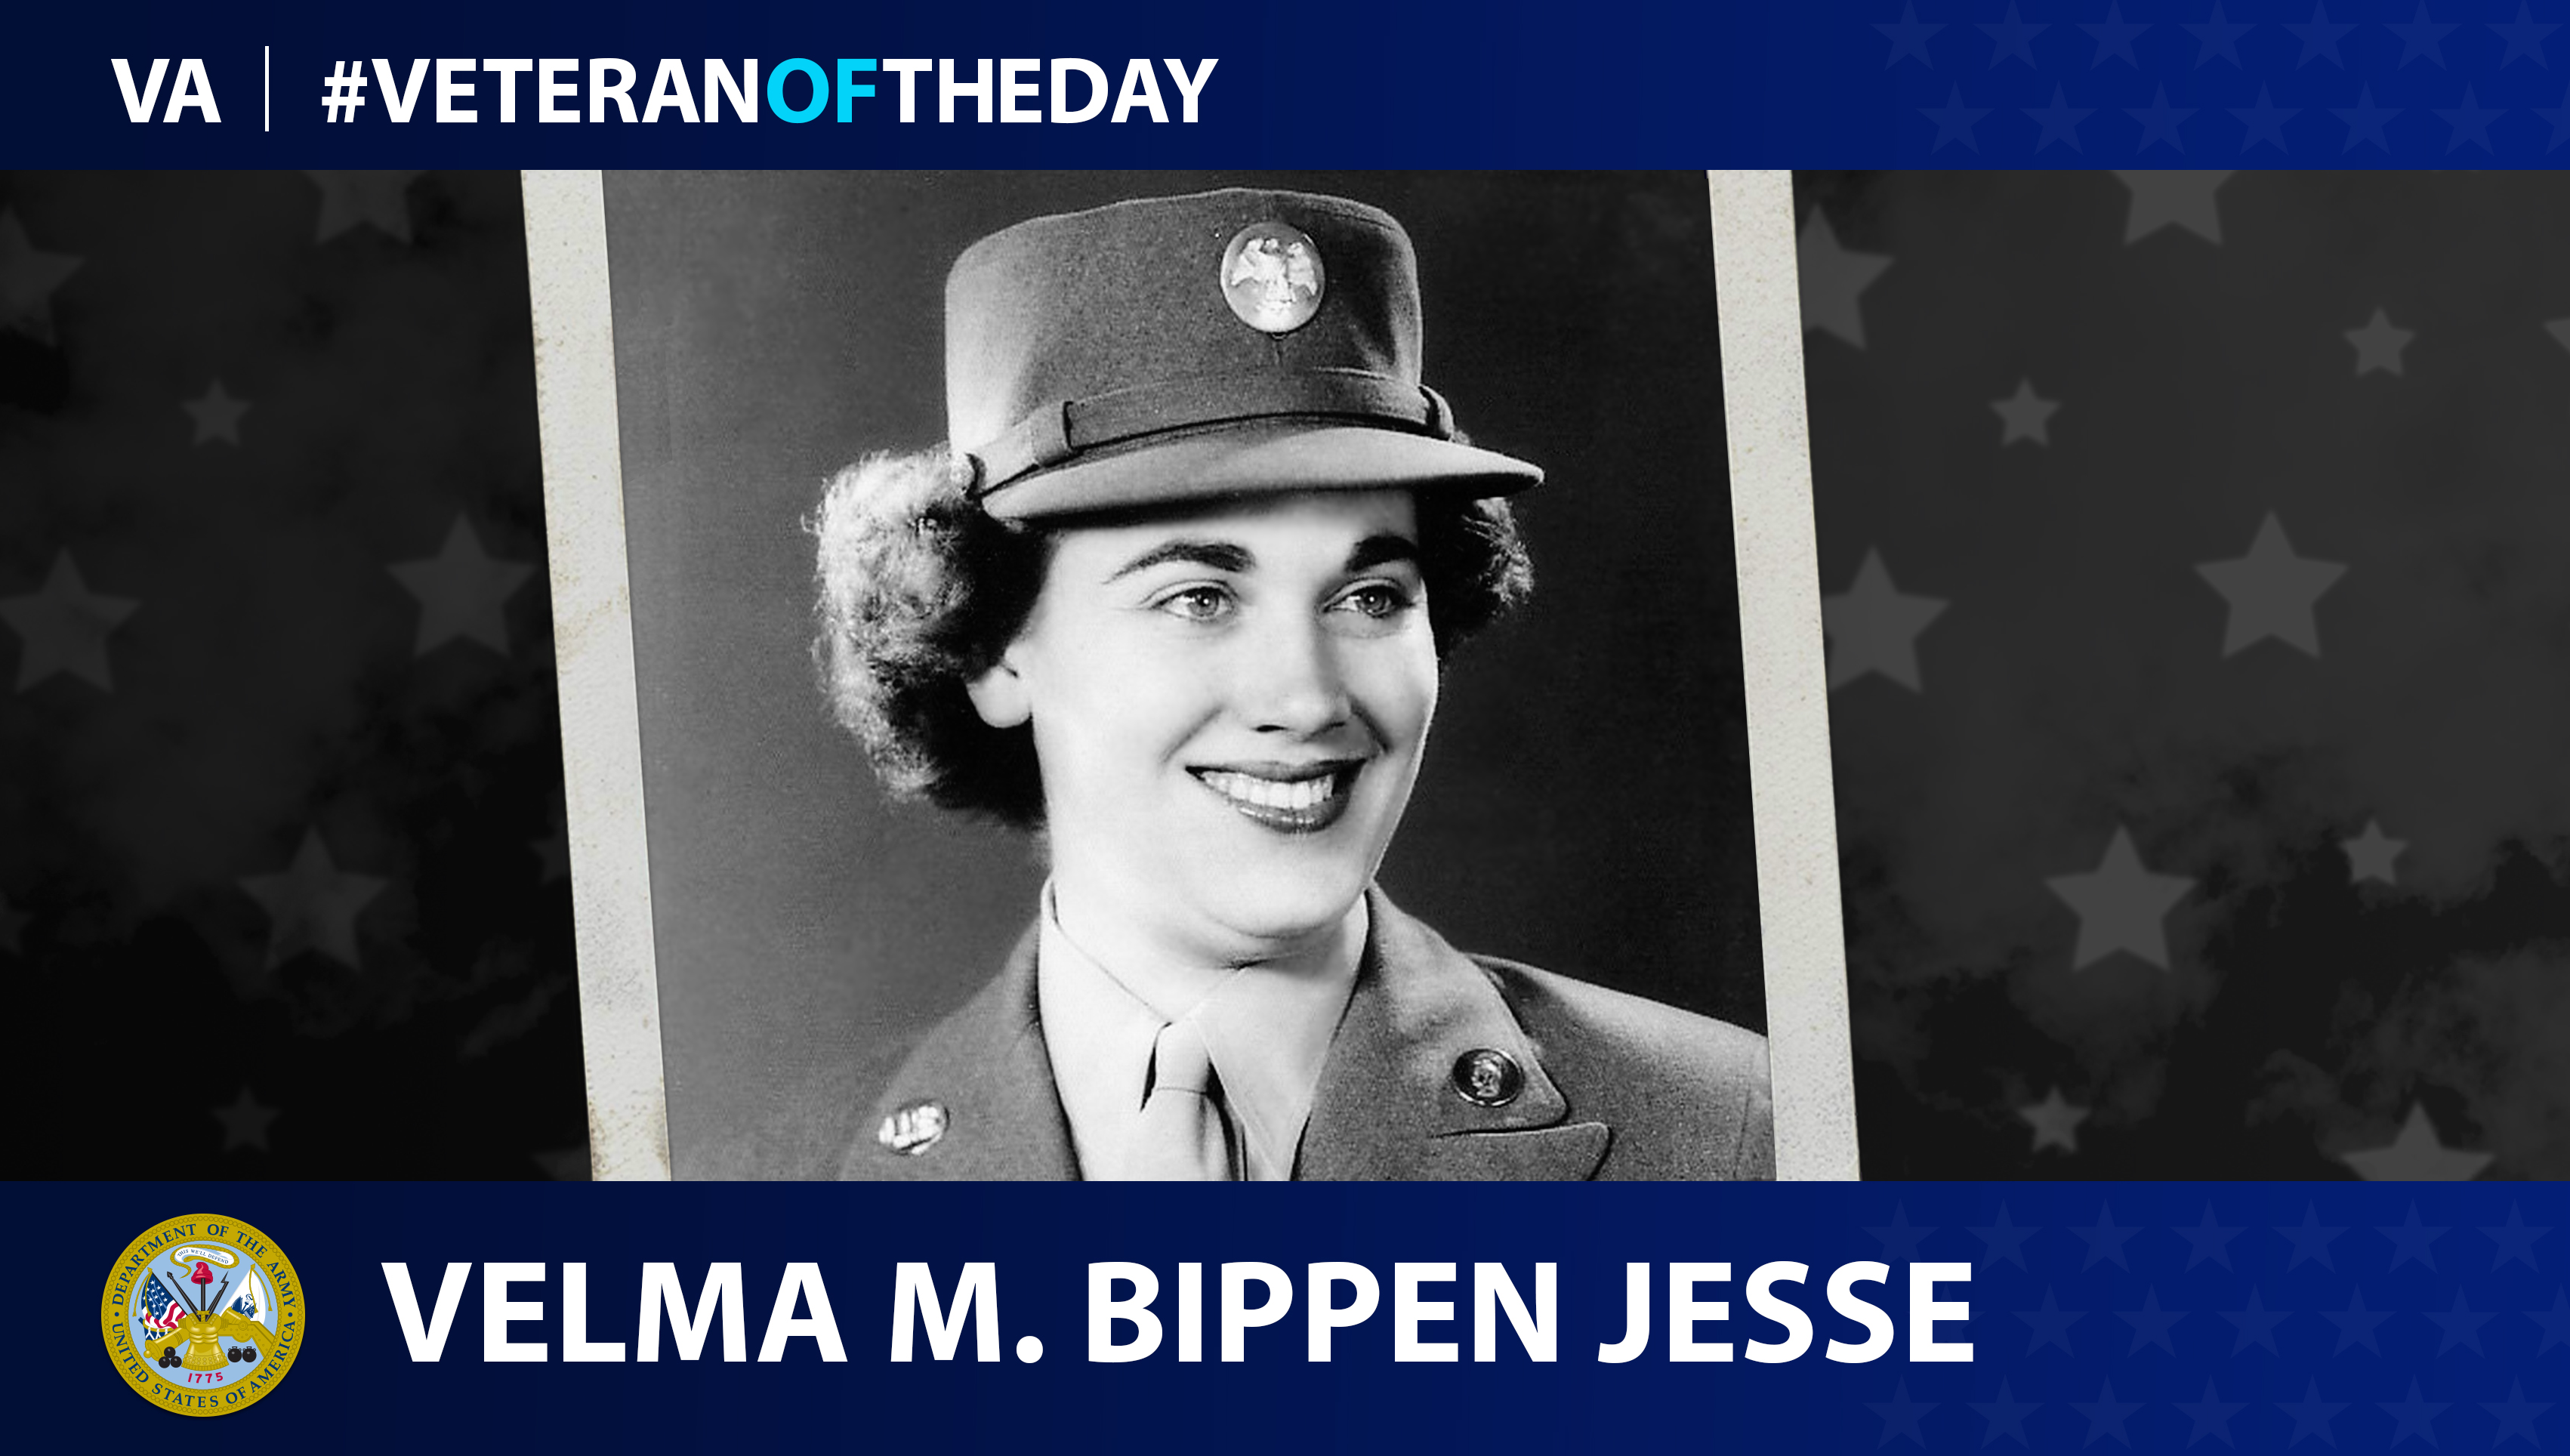 Army Veteran Velma M. Bippen Jesse is today's Veteran of the Day.